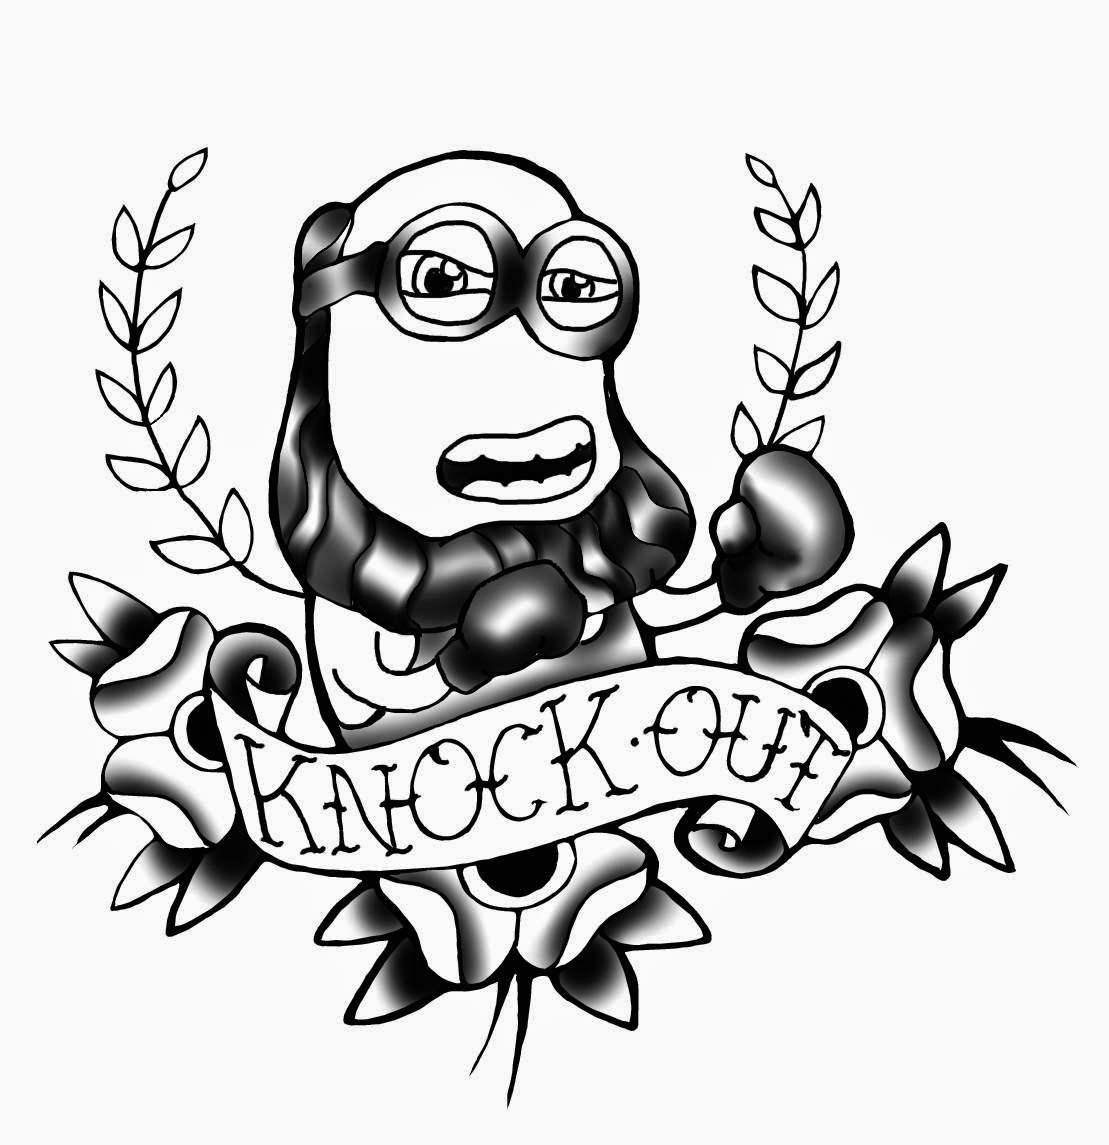 Black Ink Minion With Flowers And Banner Tattoo Design